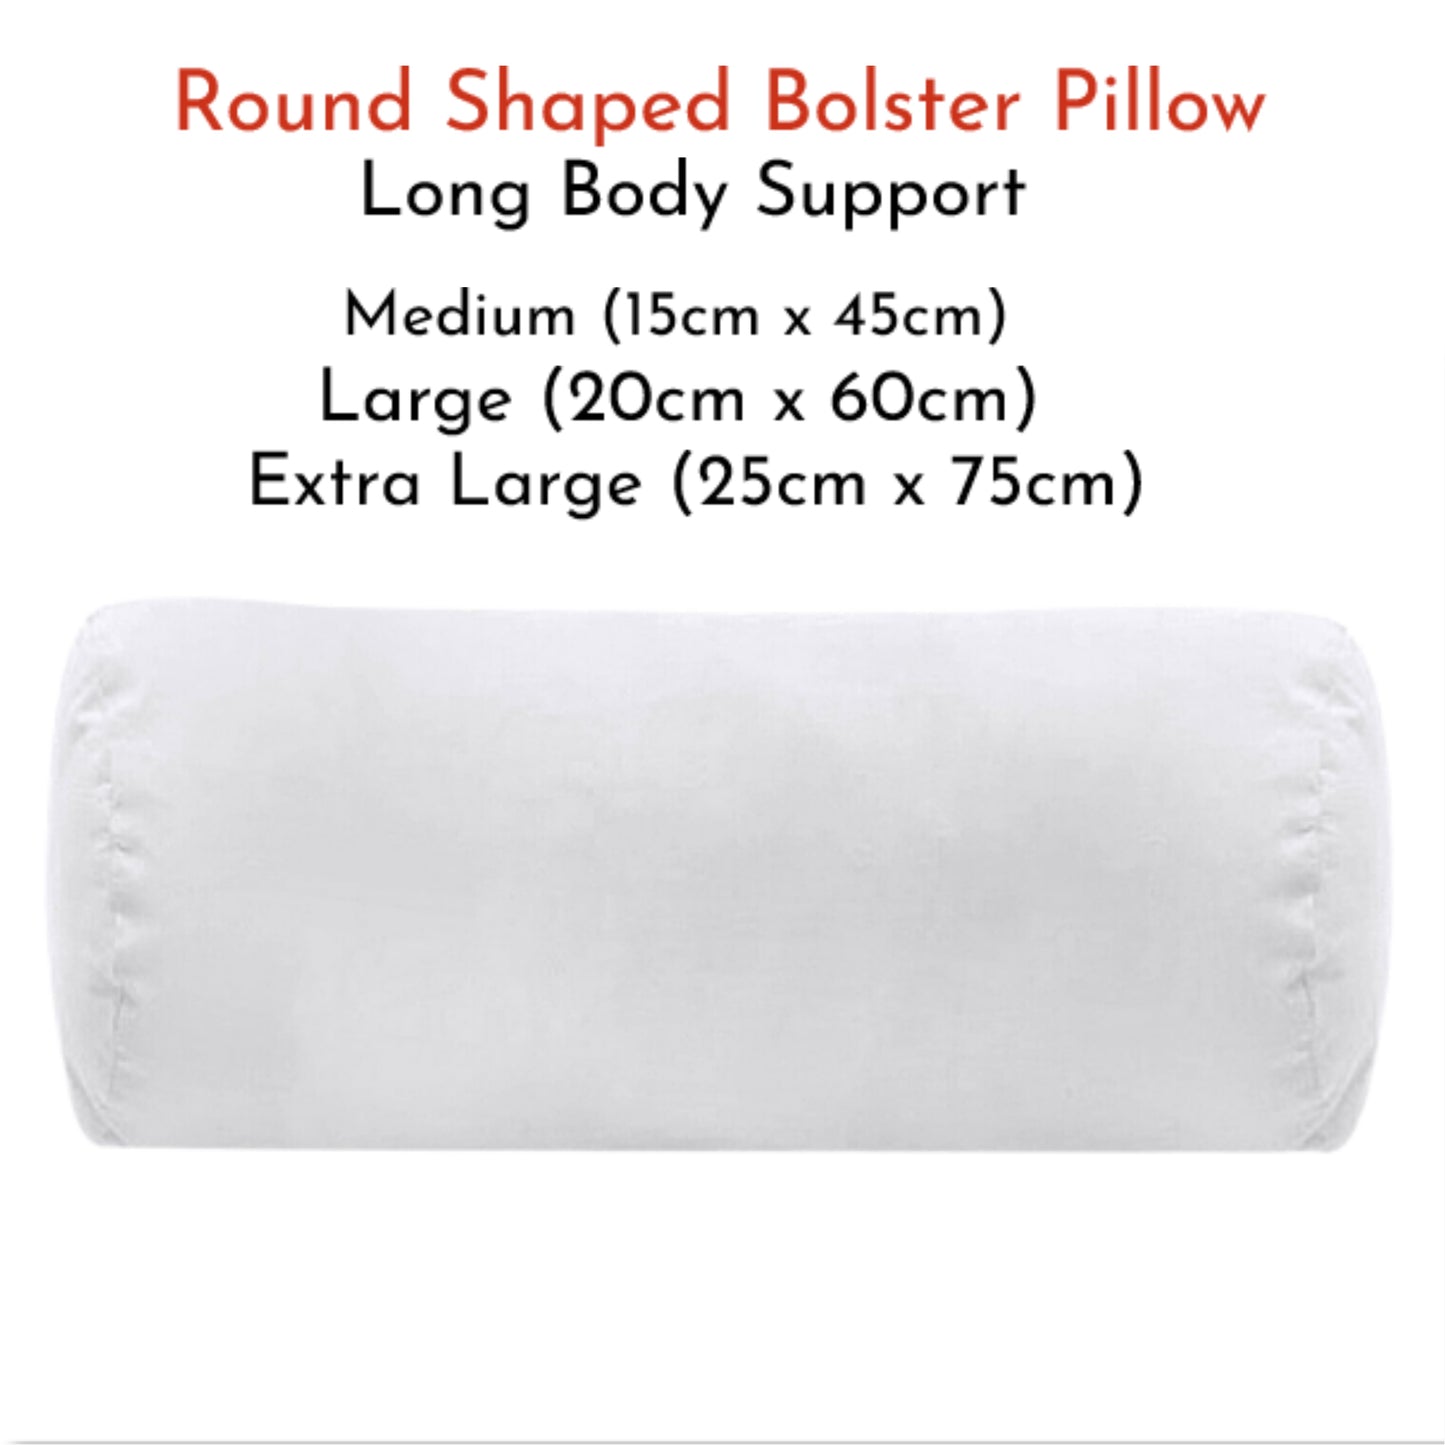 Round Shaped Bolster Pillow White Cushion Long Body Support Orthopaedic Pillow